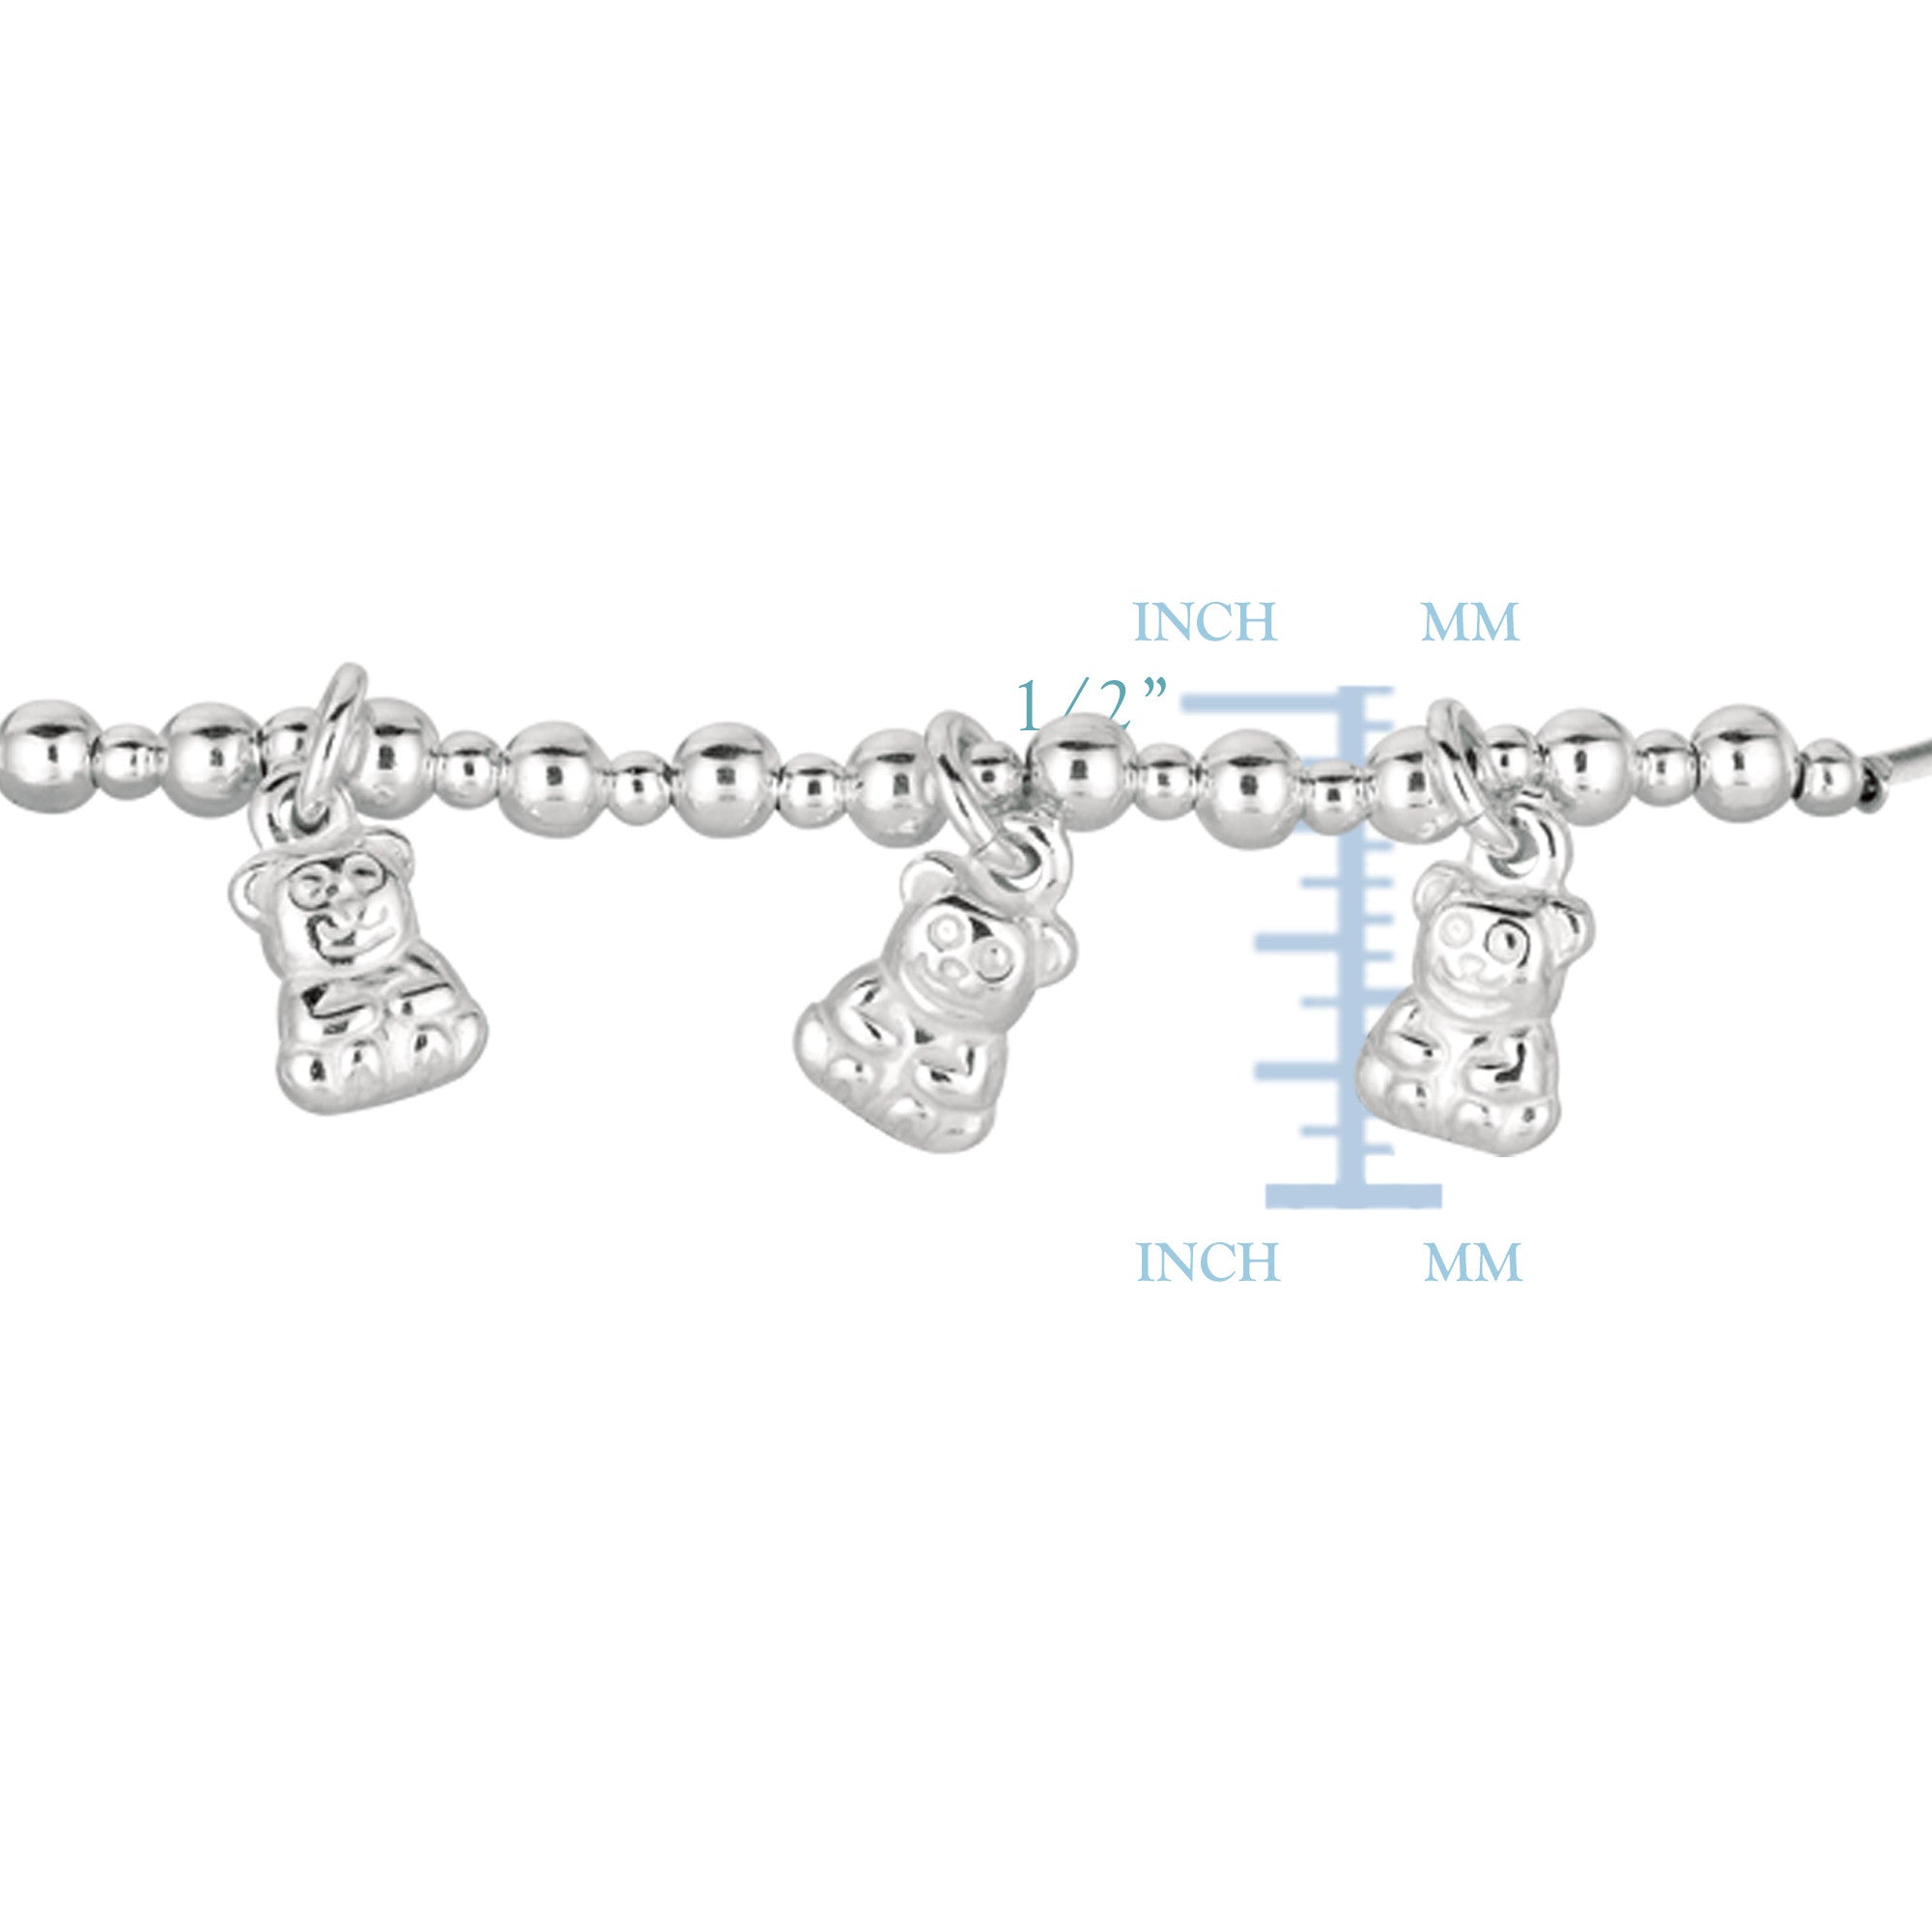 Baby Bangle With Dangling Teddy Bear Charms In Sterling Silver - 5.5 Inch fine designer jewelry for men and women